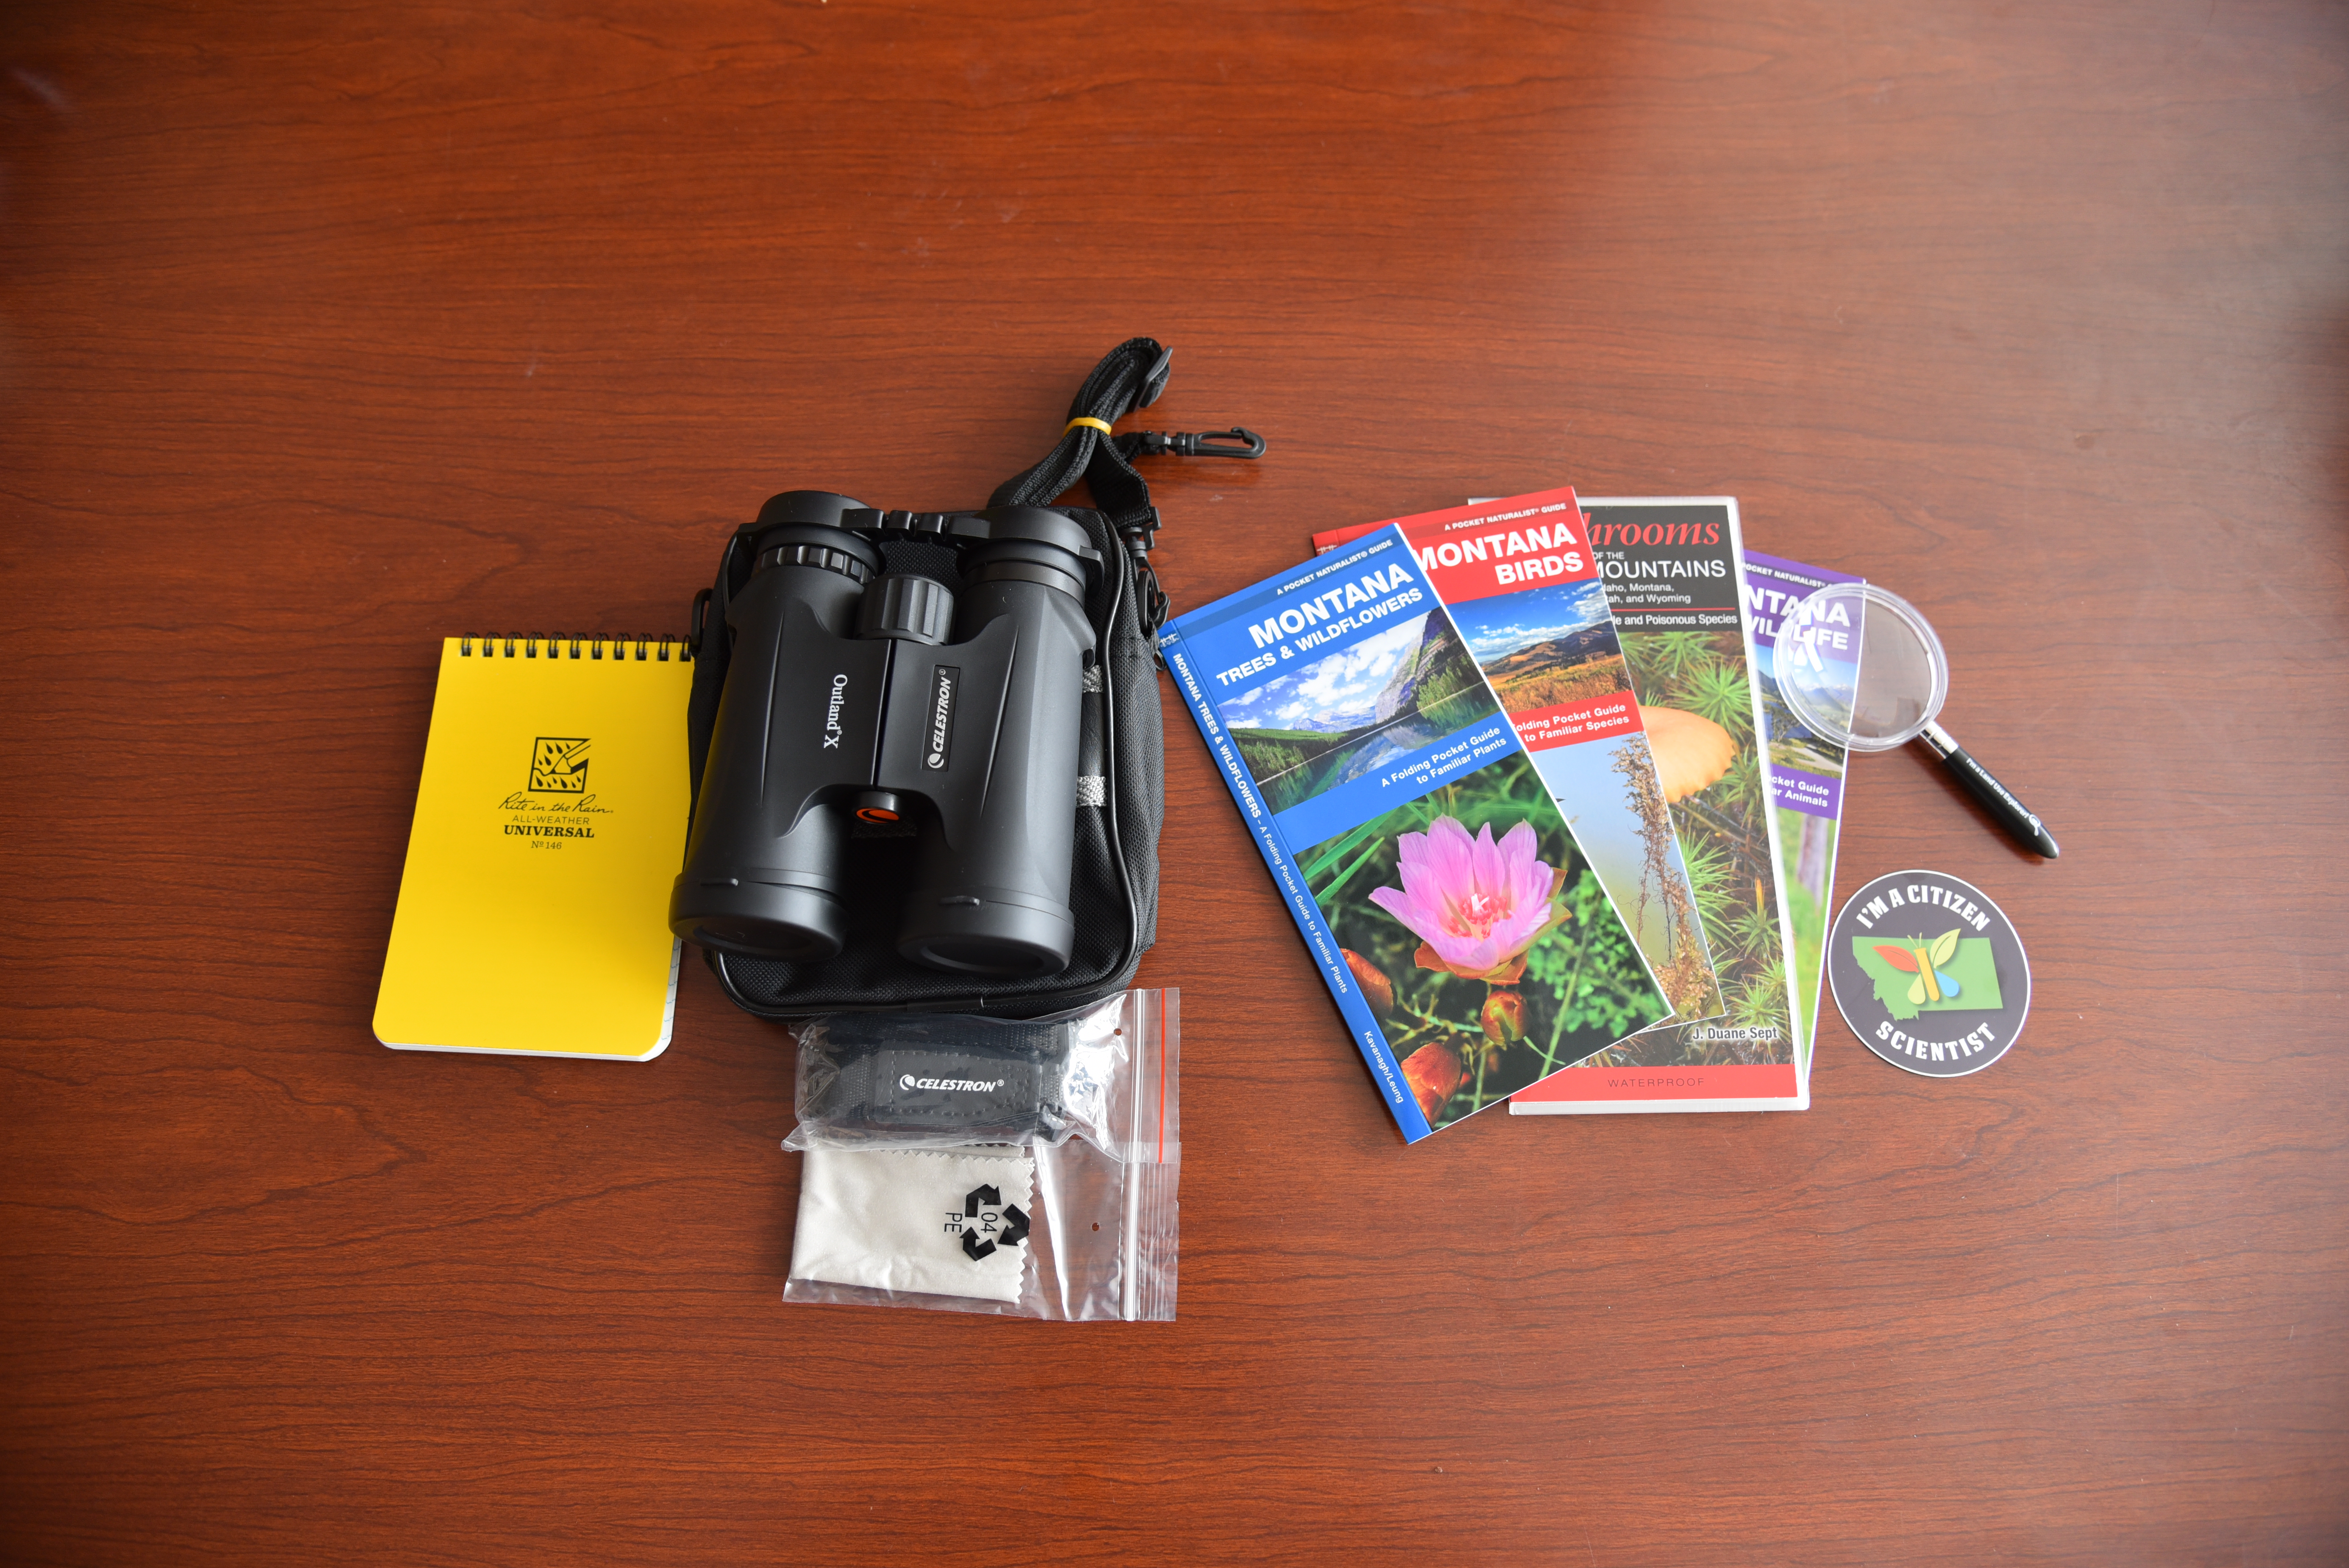 Picture of the Exploring Biodiversity citizen science lending library kit